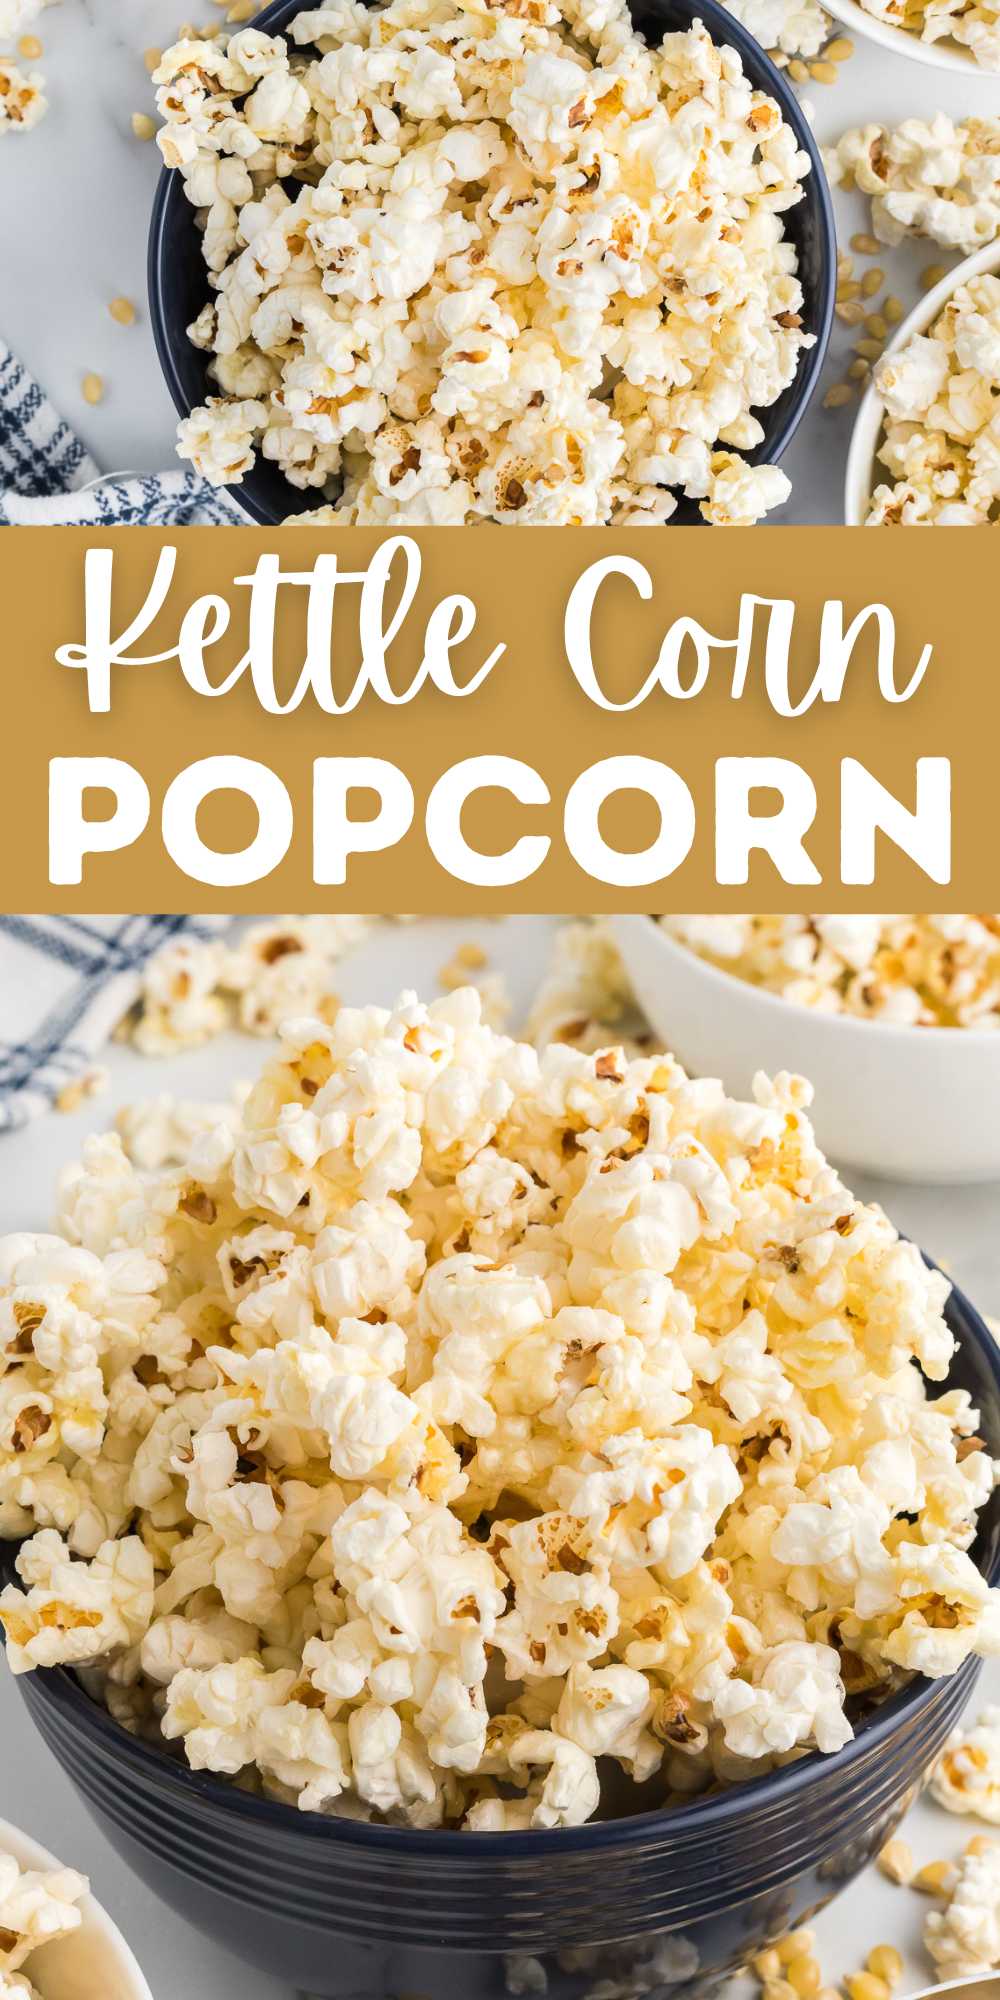 Make homemade Kettle Corn Popcorn easily with simple ingredients. This sweet and salty snack is always a family favorite. This popcorn is extremely addicting so you want to make sure you make enough. There is nothing better than a perfectly popped popcorn but adding in the sweetness from the sugar makes it so much better. #eatingonadime #kettlecornpopcorn #easypopcornrecipe